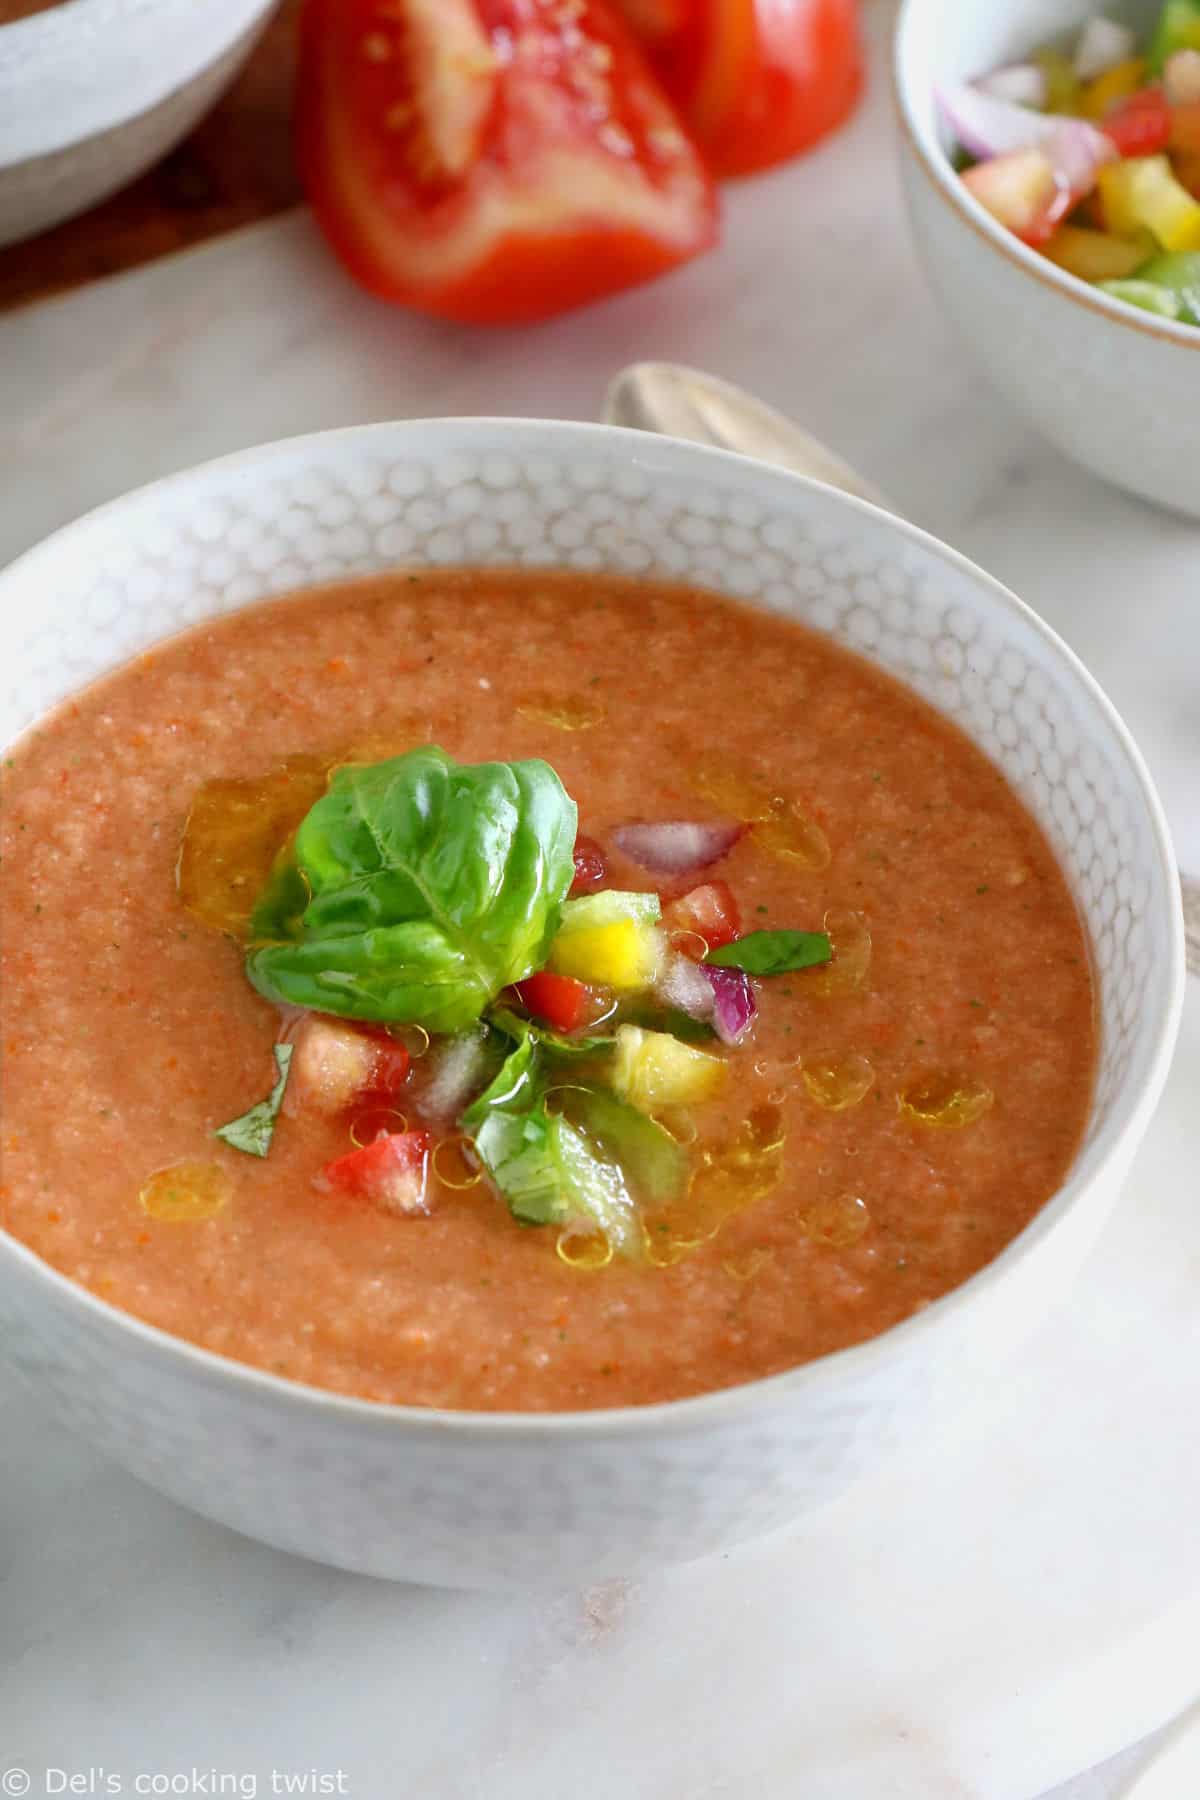 Cool off with this easy 10-minute gazpacho recipe. Prepared with sun-ripe tomatoes and other summer vegetables mixed in a blender with other seasoning, this chilled soup is super refreshing and bursting with fresh-from-the-garden flavors.